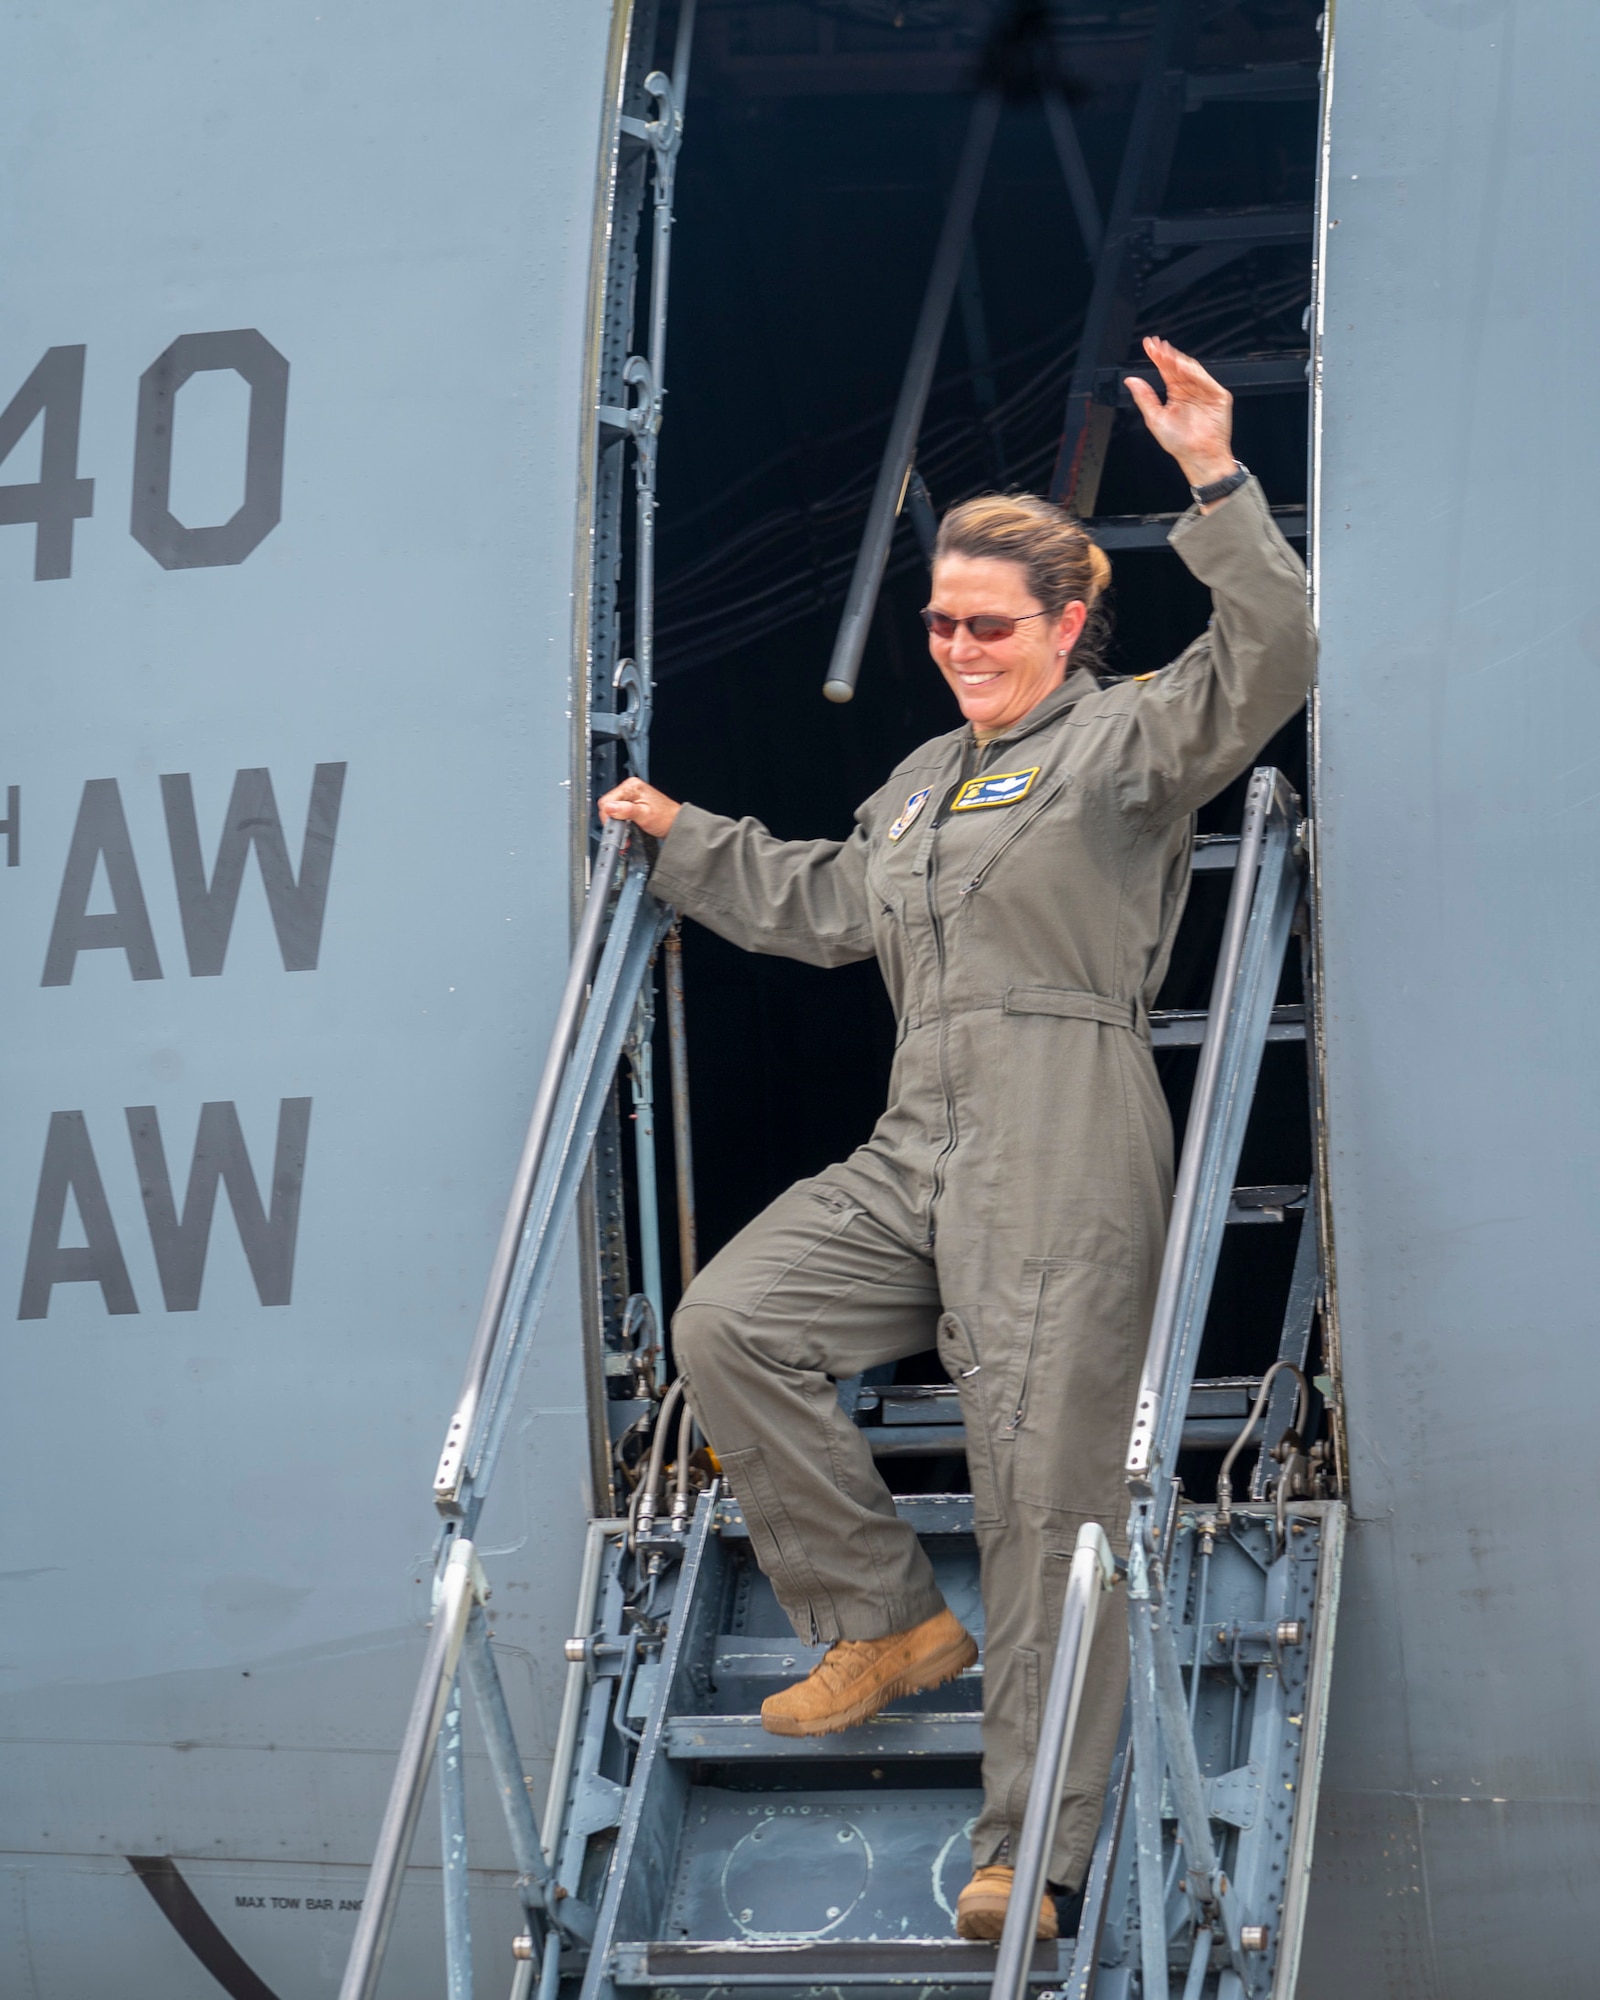 U.S. Air Force Lt. Col. Anita West-Werner, 512th Operations Group, Dover Air Force Base, Delaware, descends from a C-5M Super Galaxy June 7, 2022. West-Werner flew her final flight after 26 years with the 512th AW. West-Werner's next assignment is at the Pentagon in Arlington, Virginia, where she'll be the Individual Mobilization Augmentee to the Director of the Air Force Crisis Action Team. (U.S. Air Force photo by Mauricio Campino)